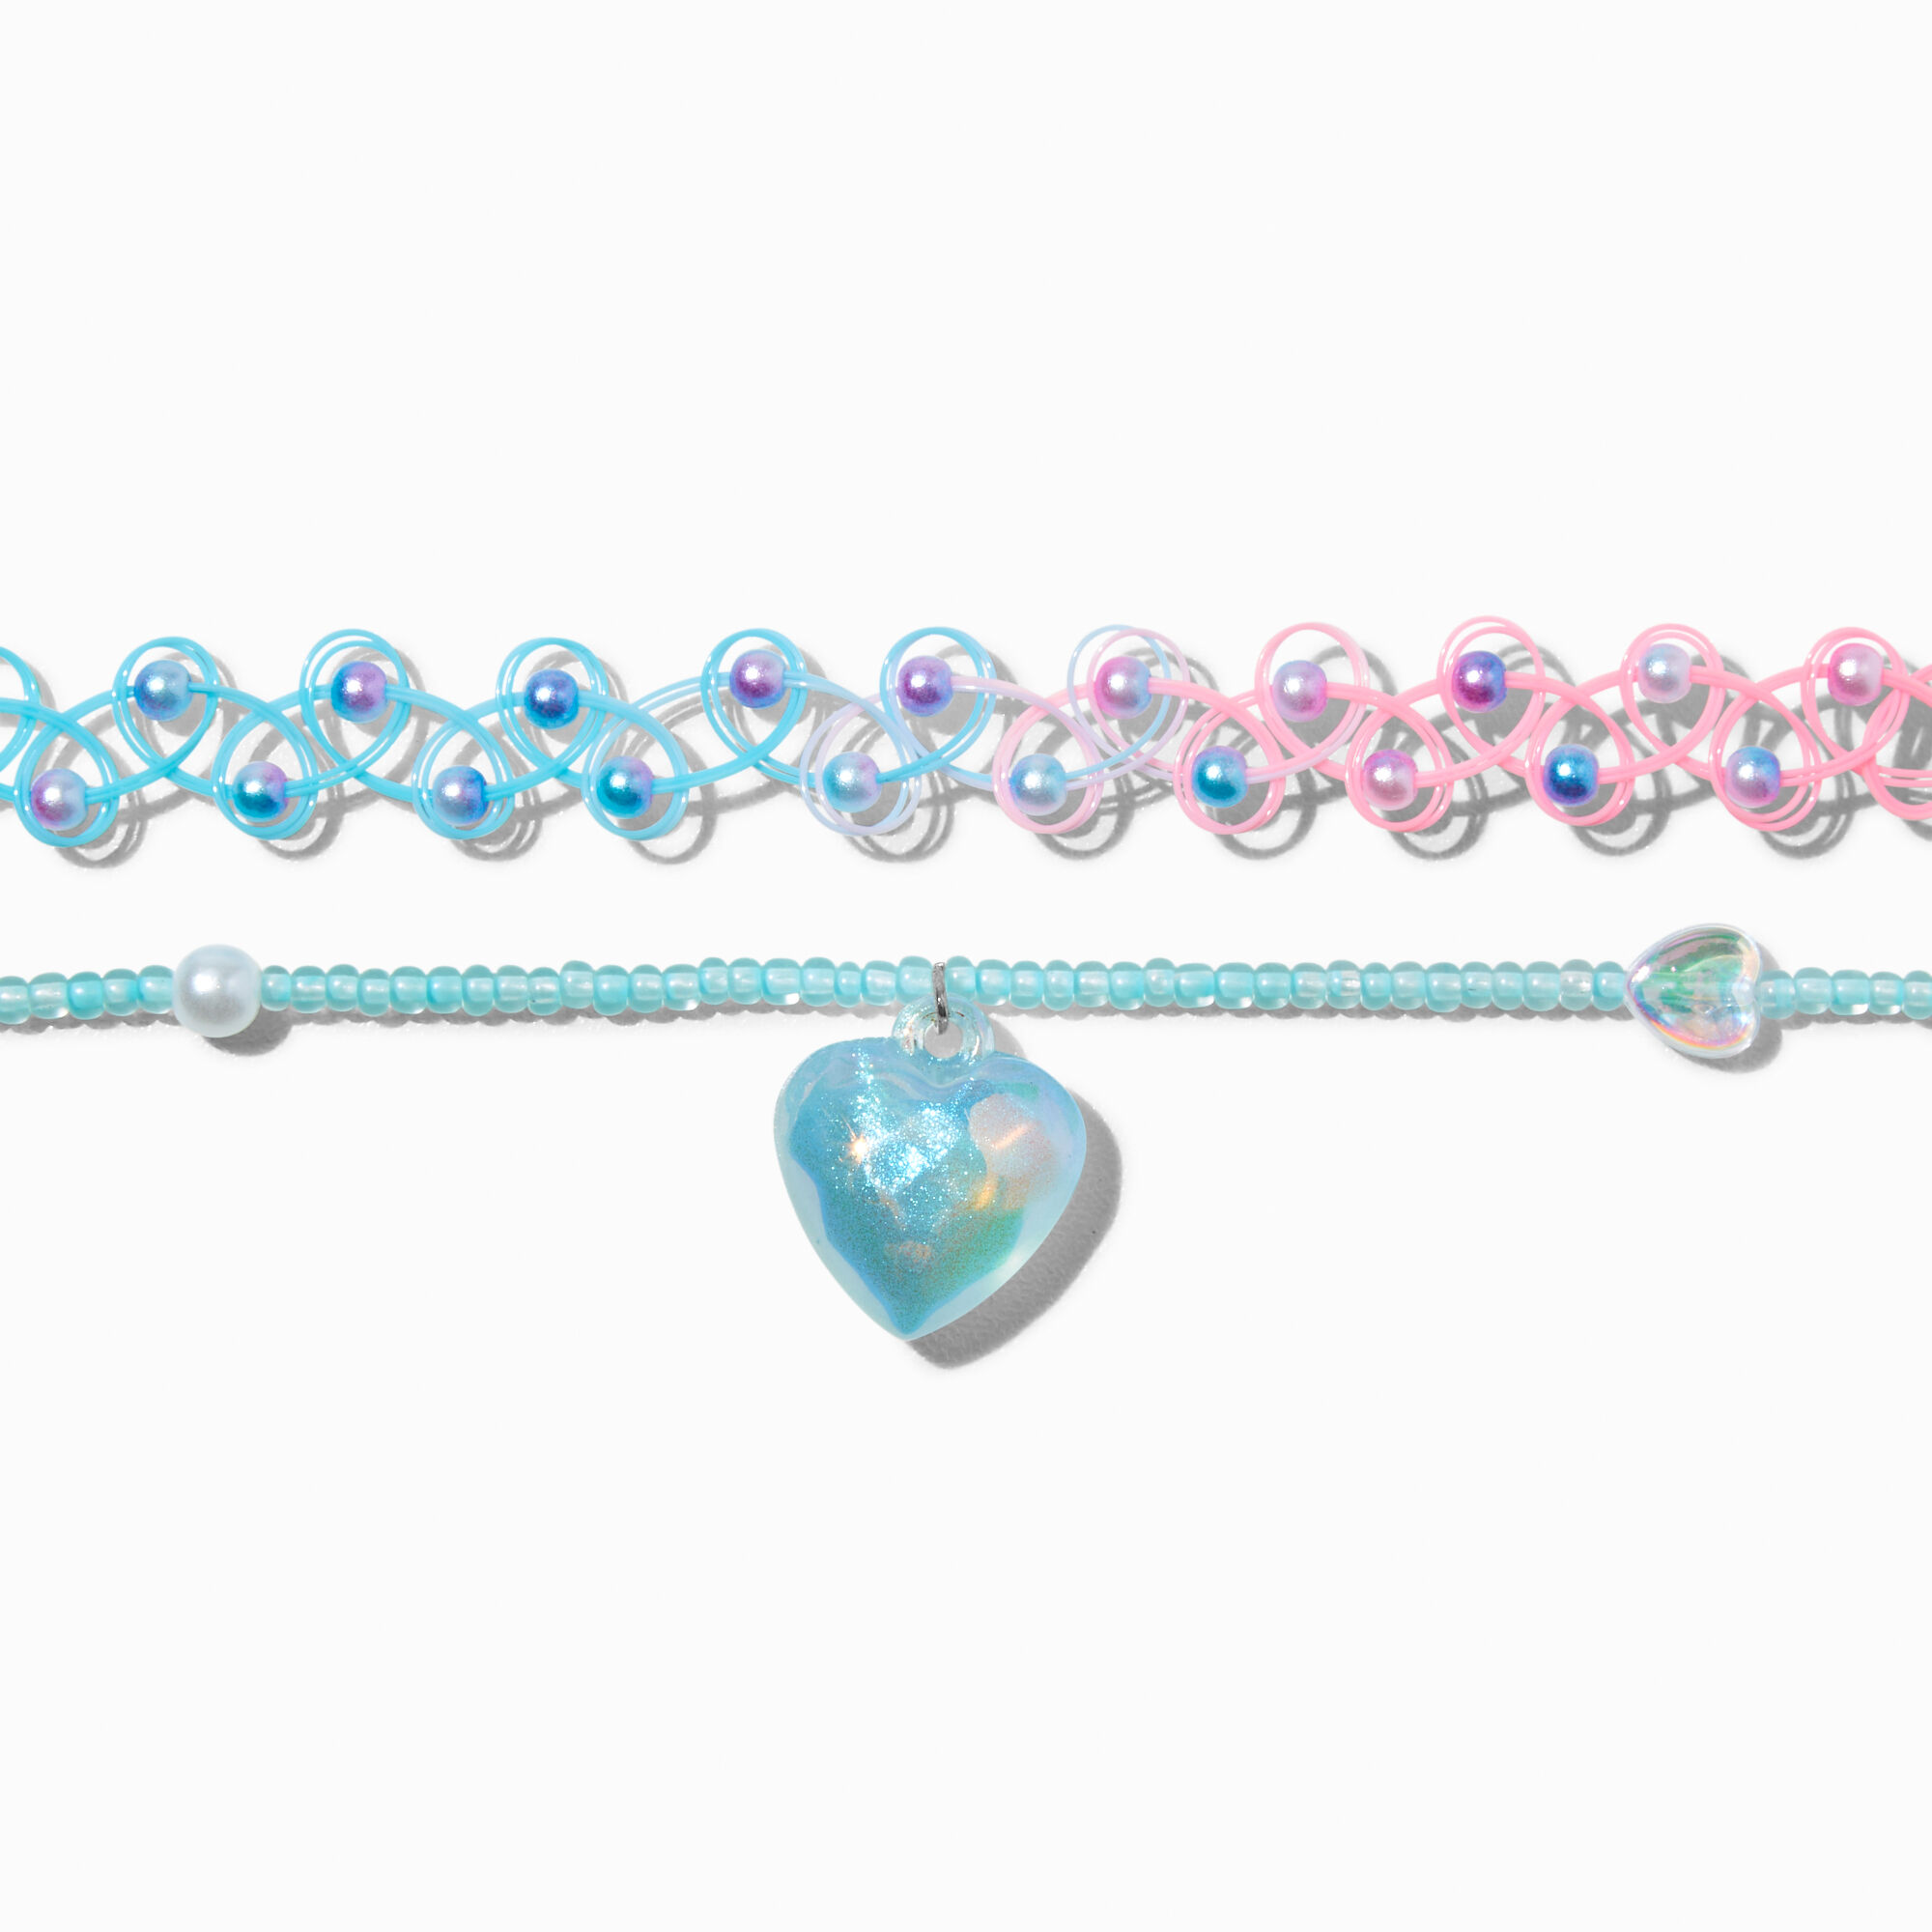 View Claires Iridescent Heart Tattoo Choker Necklace Set 2 Pack information